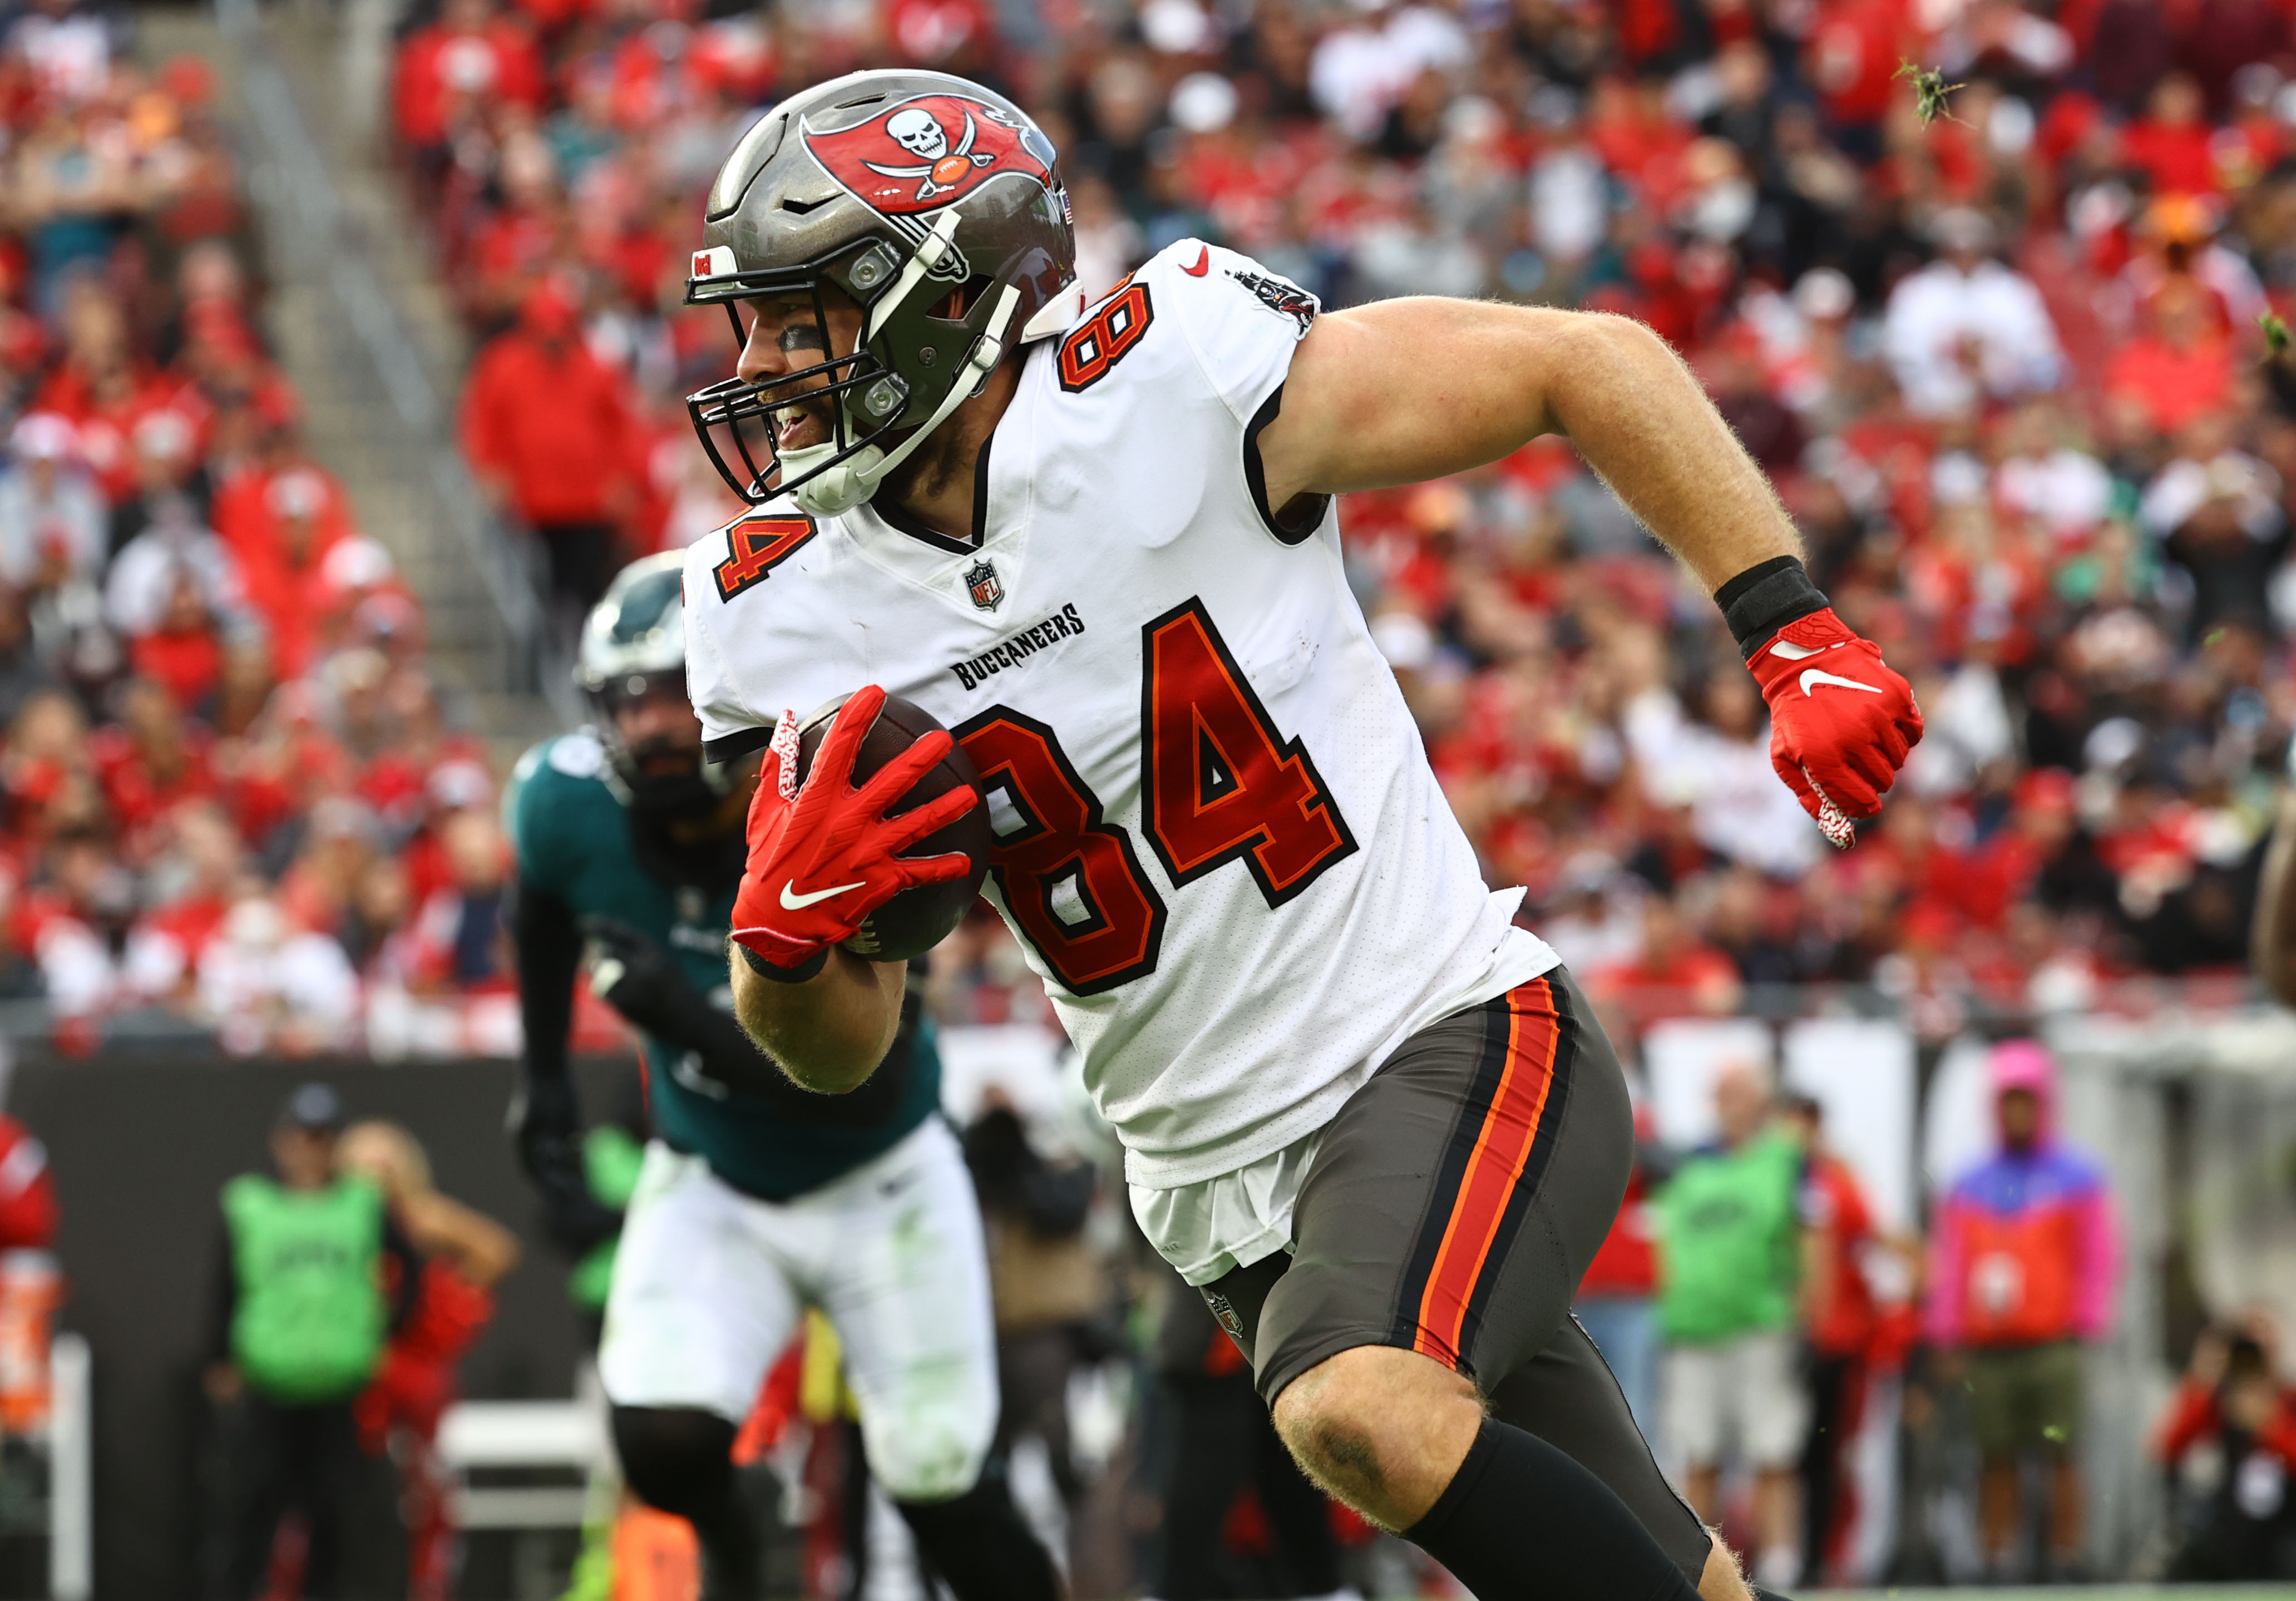 Tampa Bay Buccaneers tight end Cameron Brate (84) runs with the ball against the Philadelphia Eagles during the second half in a NFC Wild Card playoff football game at Raymond James Stadium.